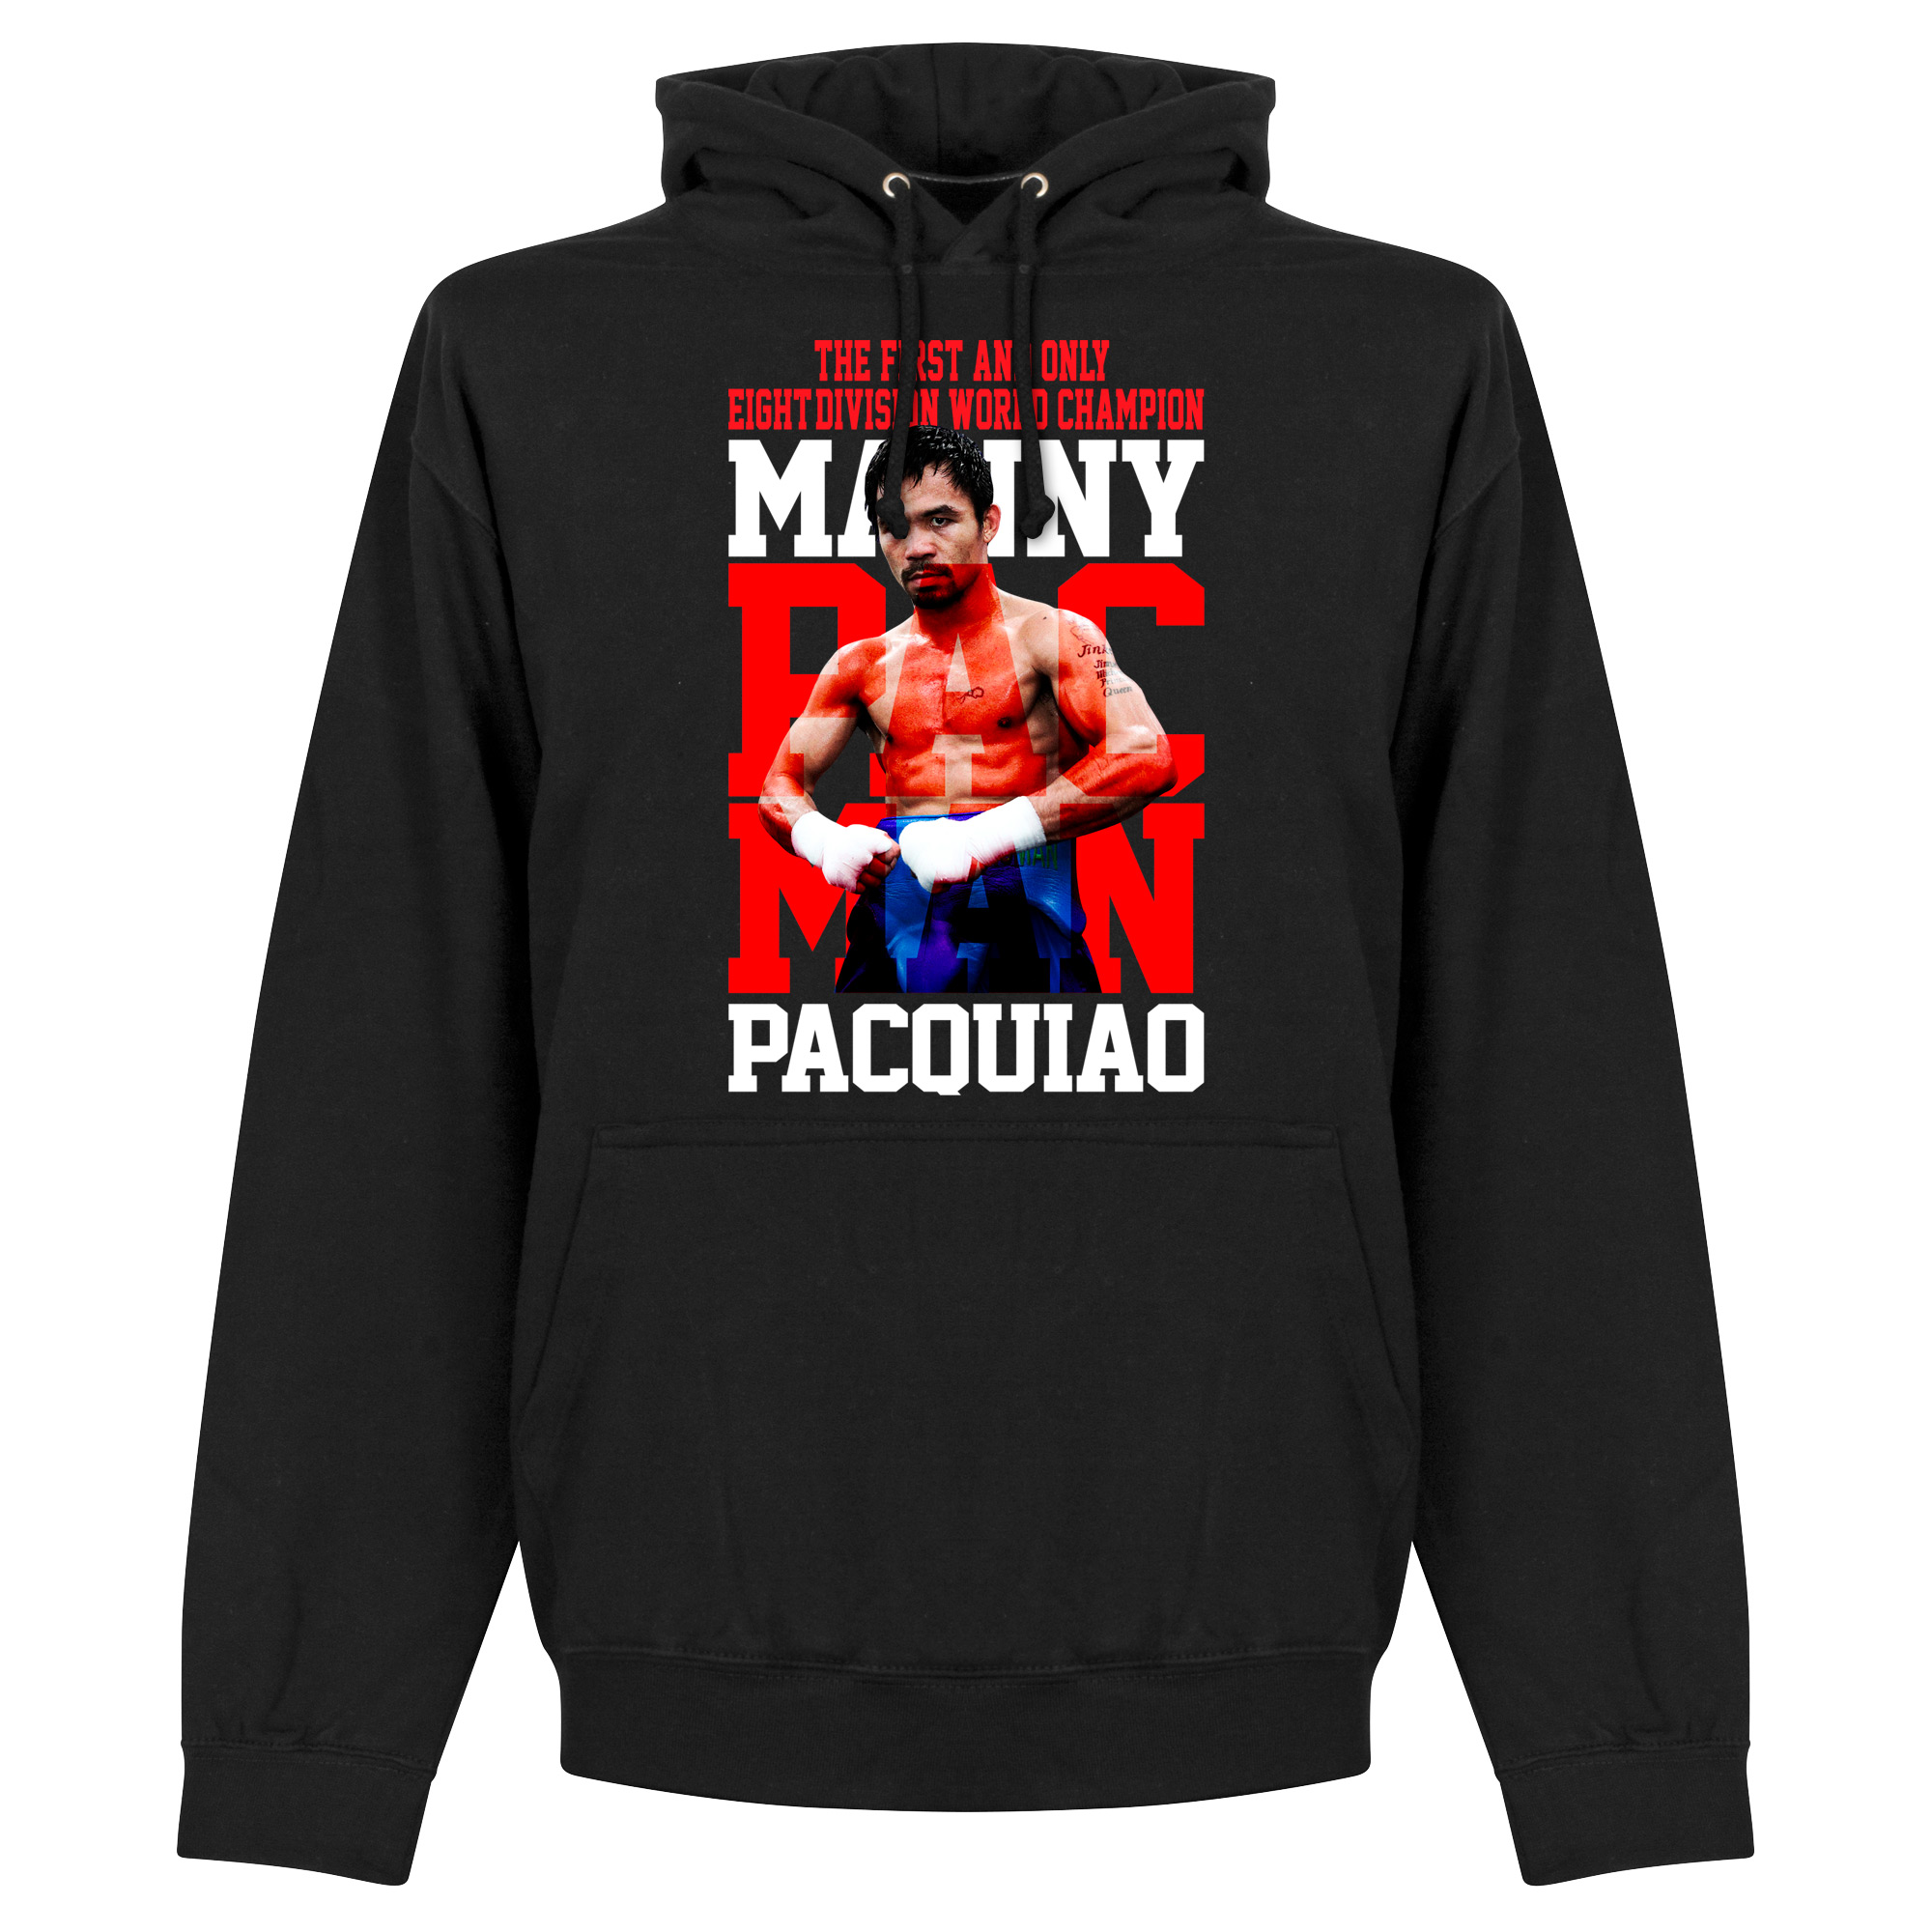 Manny Pacquiao Legend Hooded Sweater S